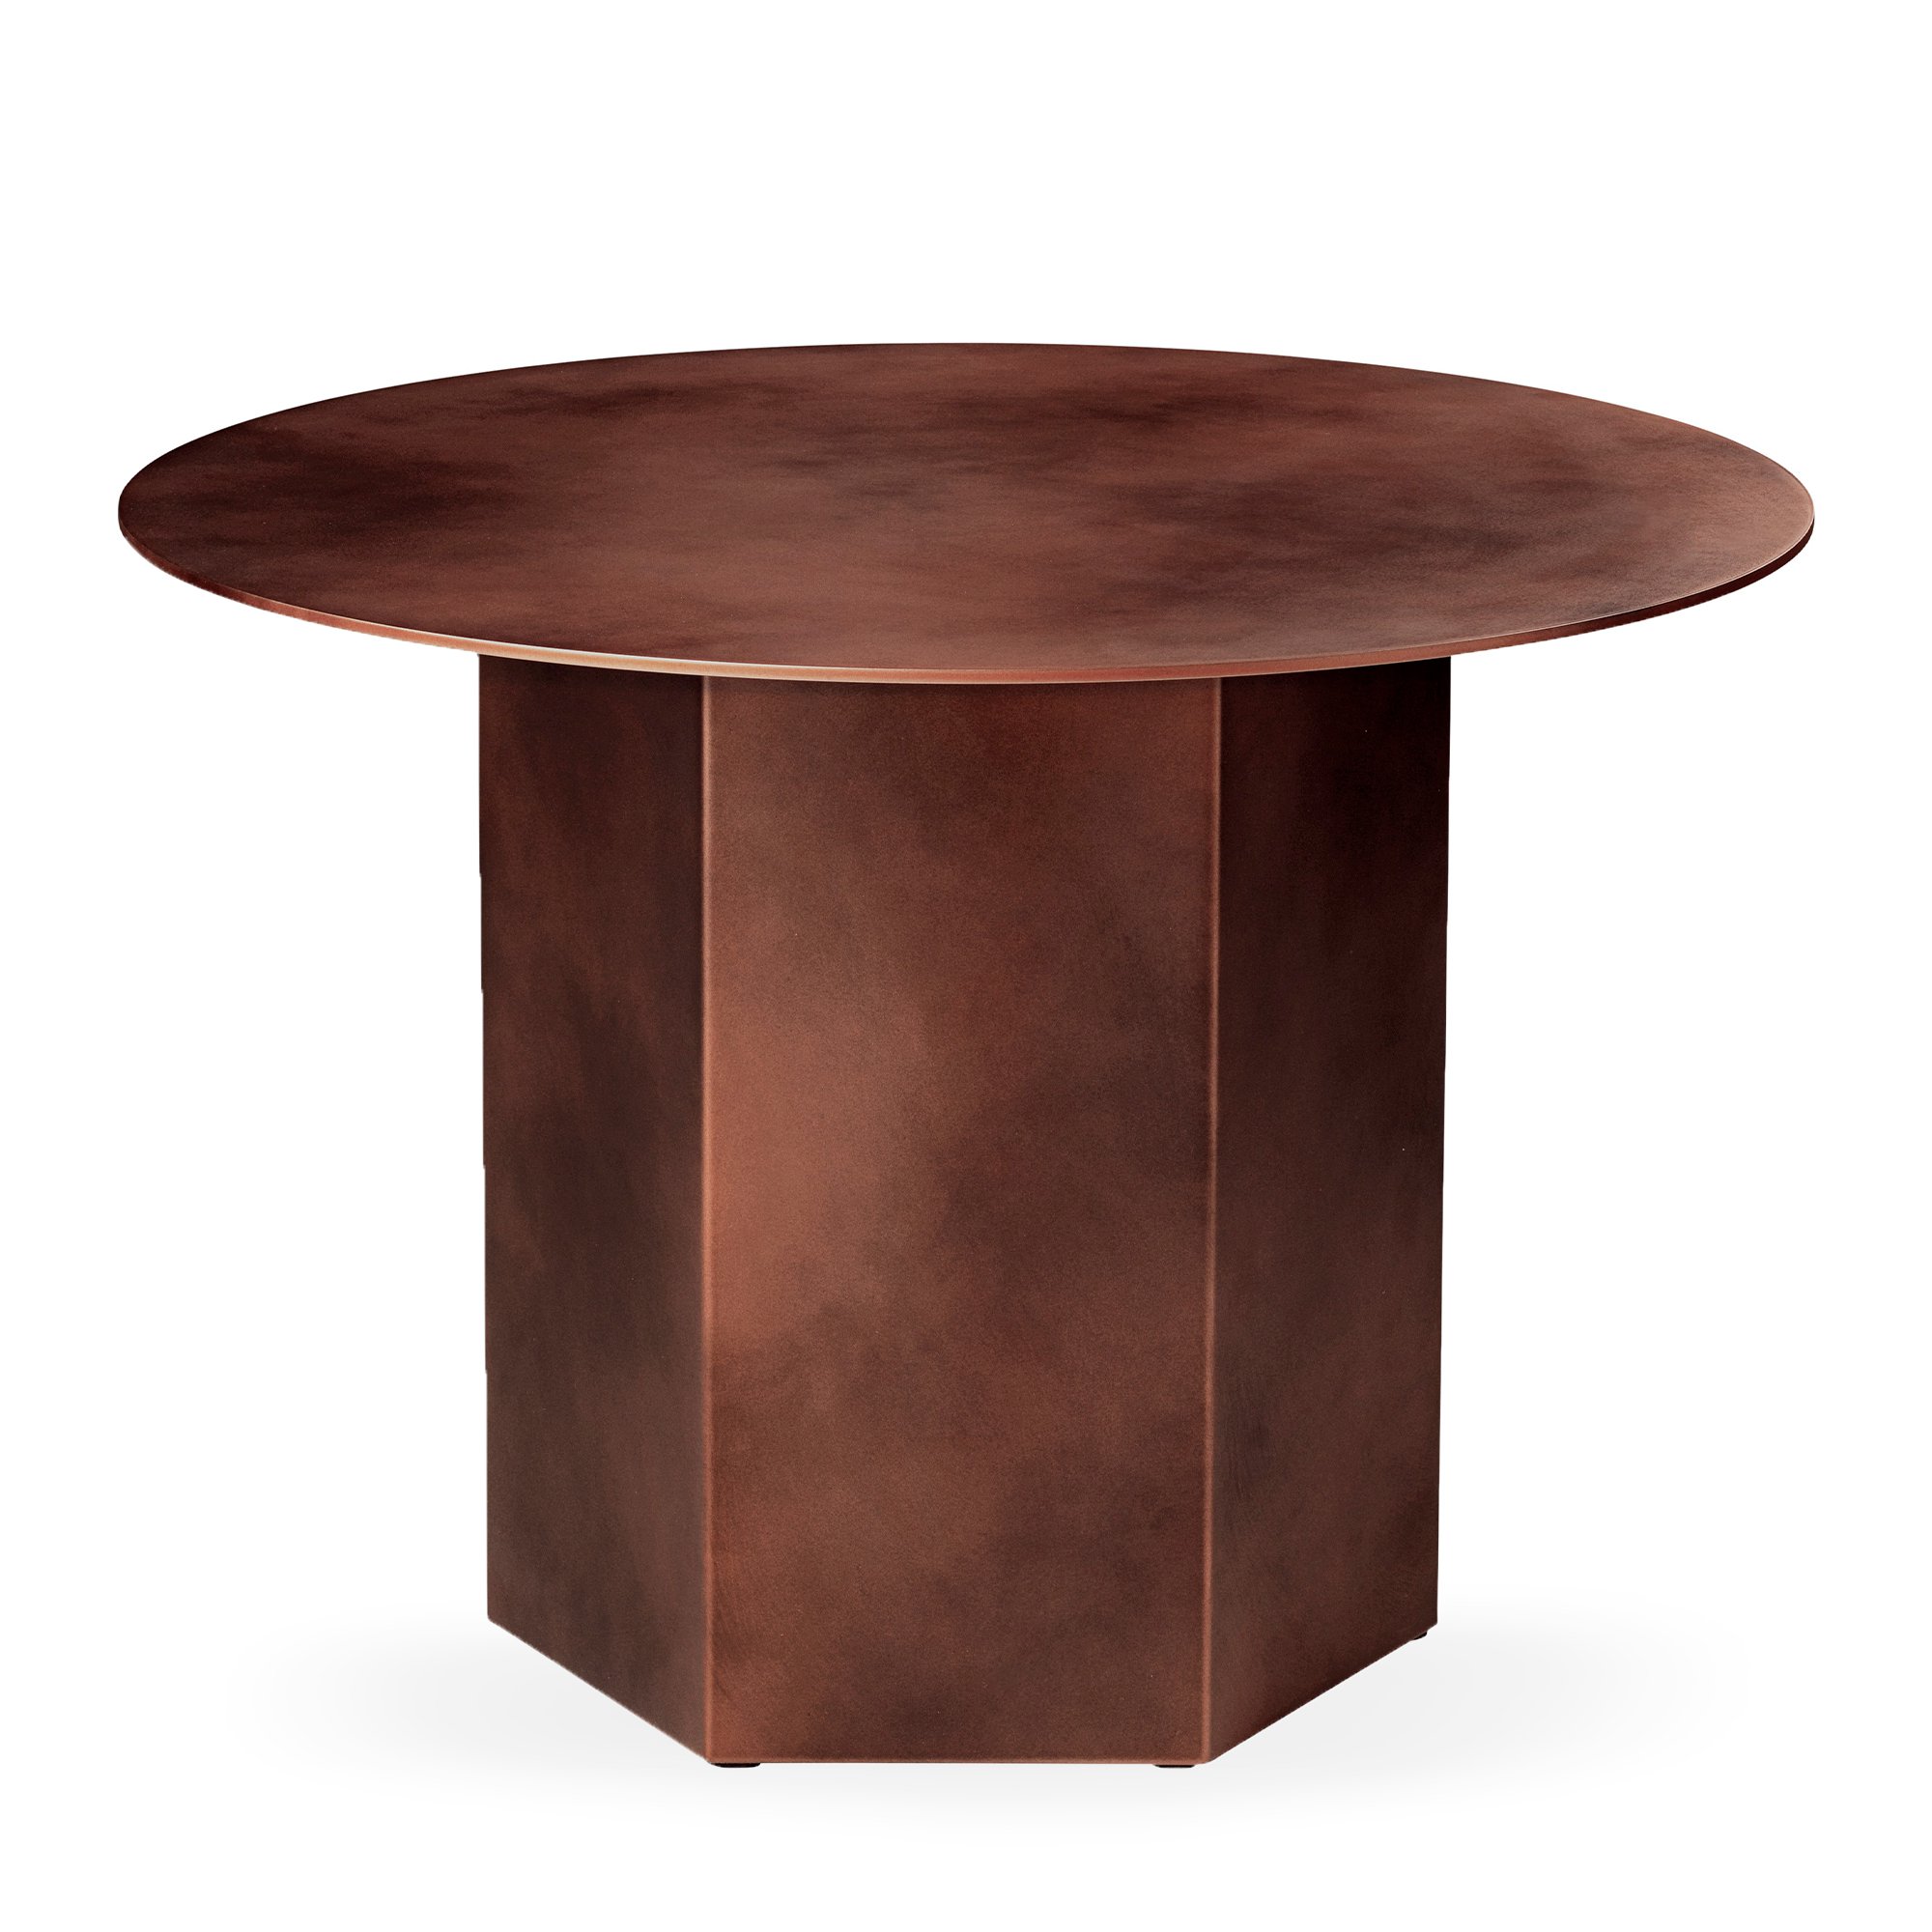 Epic Coffee Table in Earthy Red 60cm By GUBI